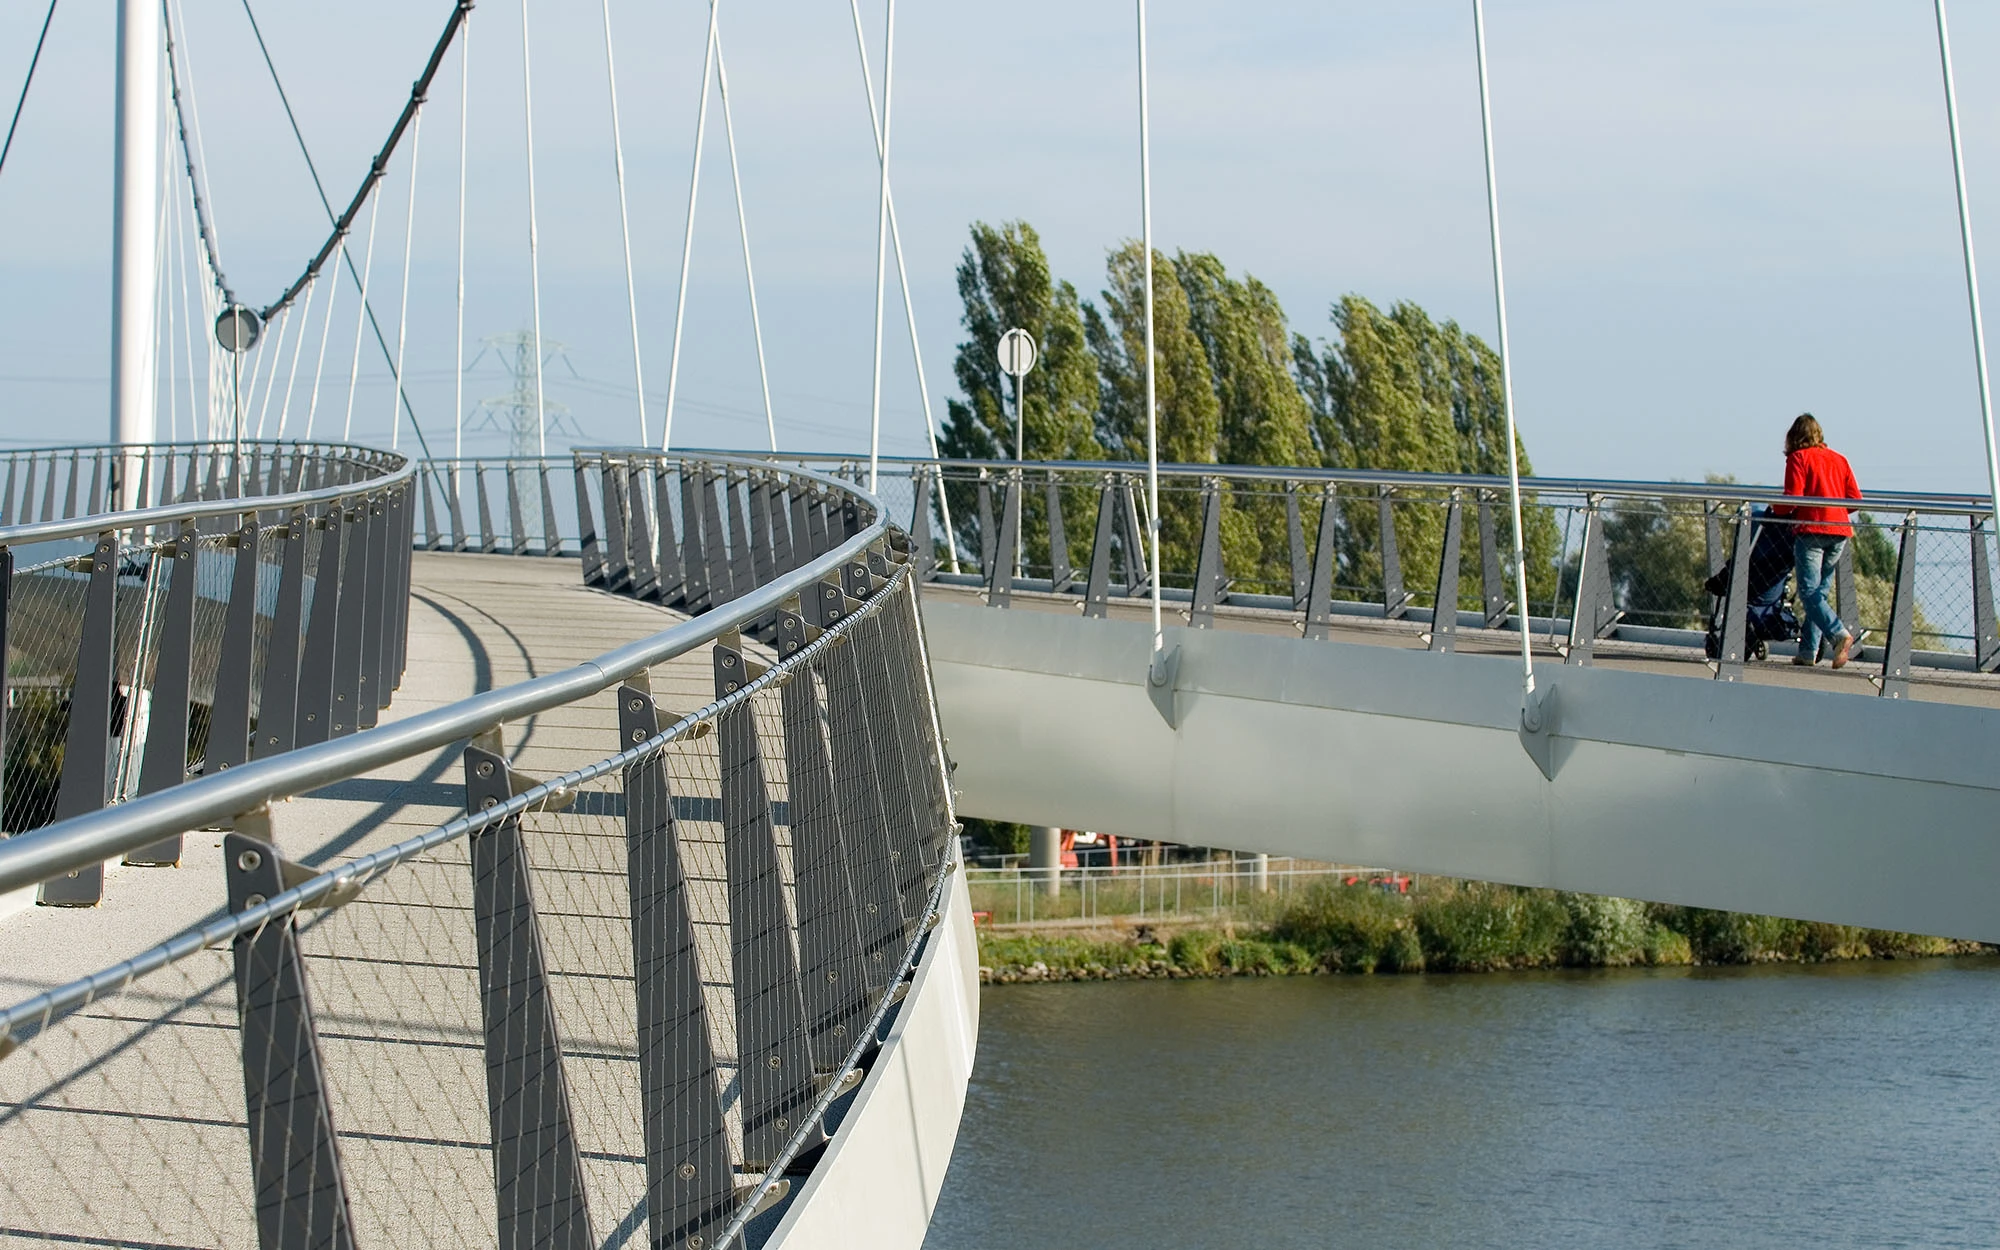 Section of bridge with cyclist